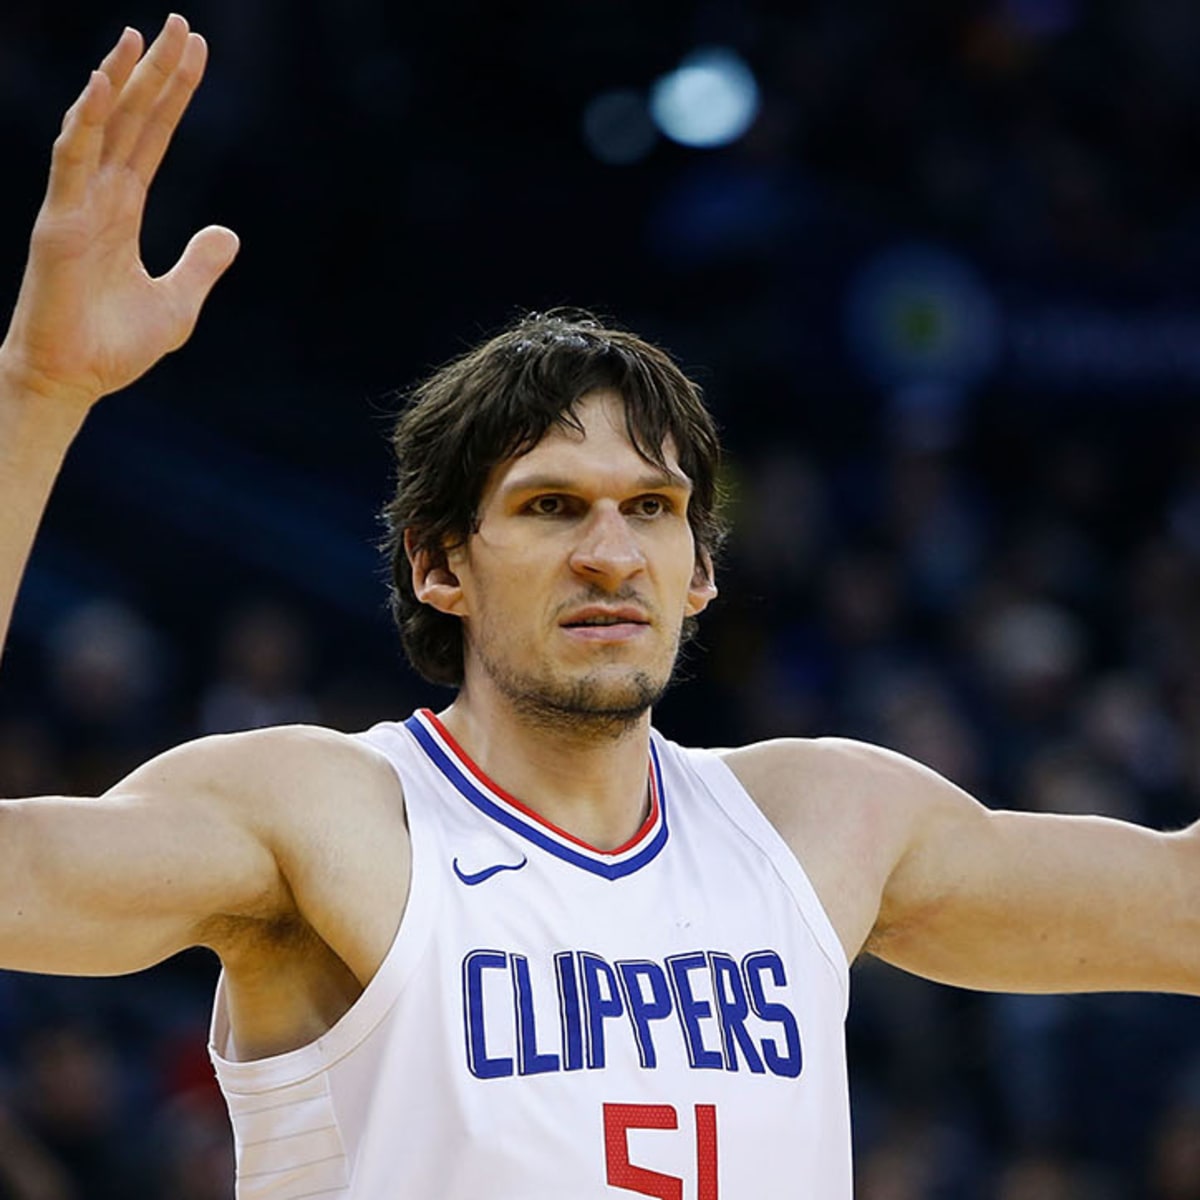 Report: Pistons signing center Boban Marjanovic - who has huge hands